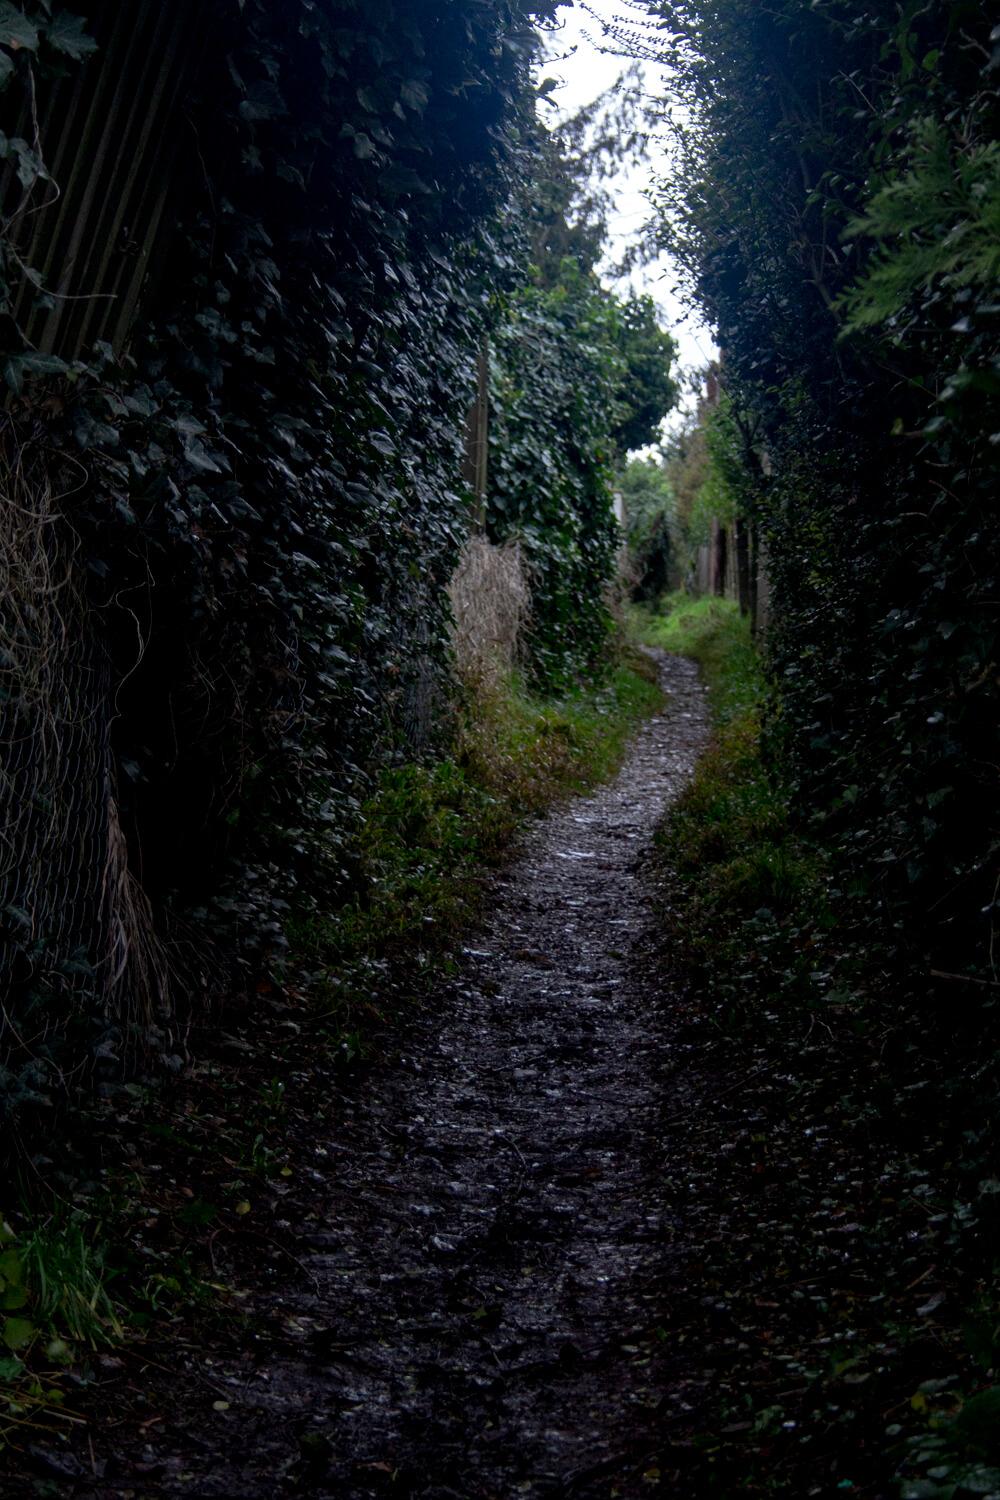 Looking up a muddy path with fences on either side overgrown with ivy